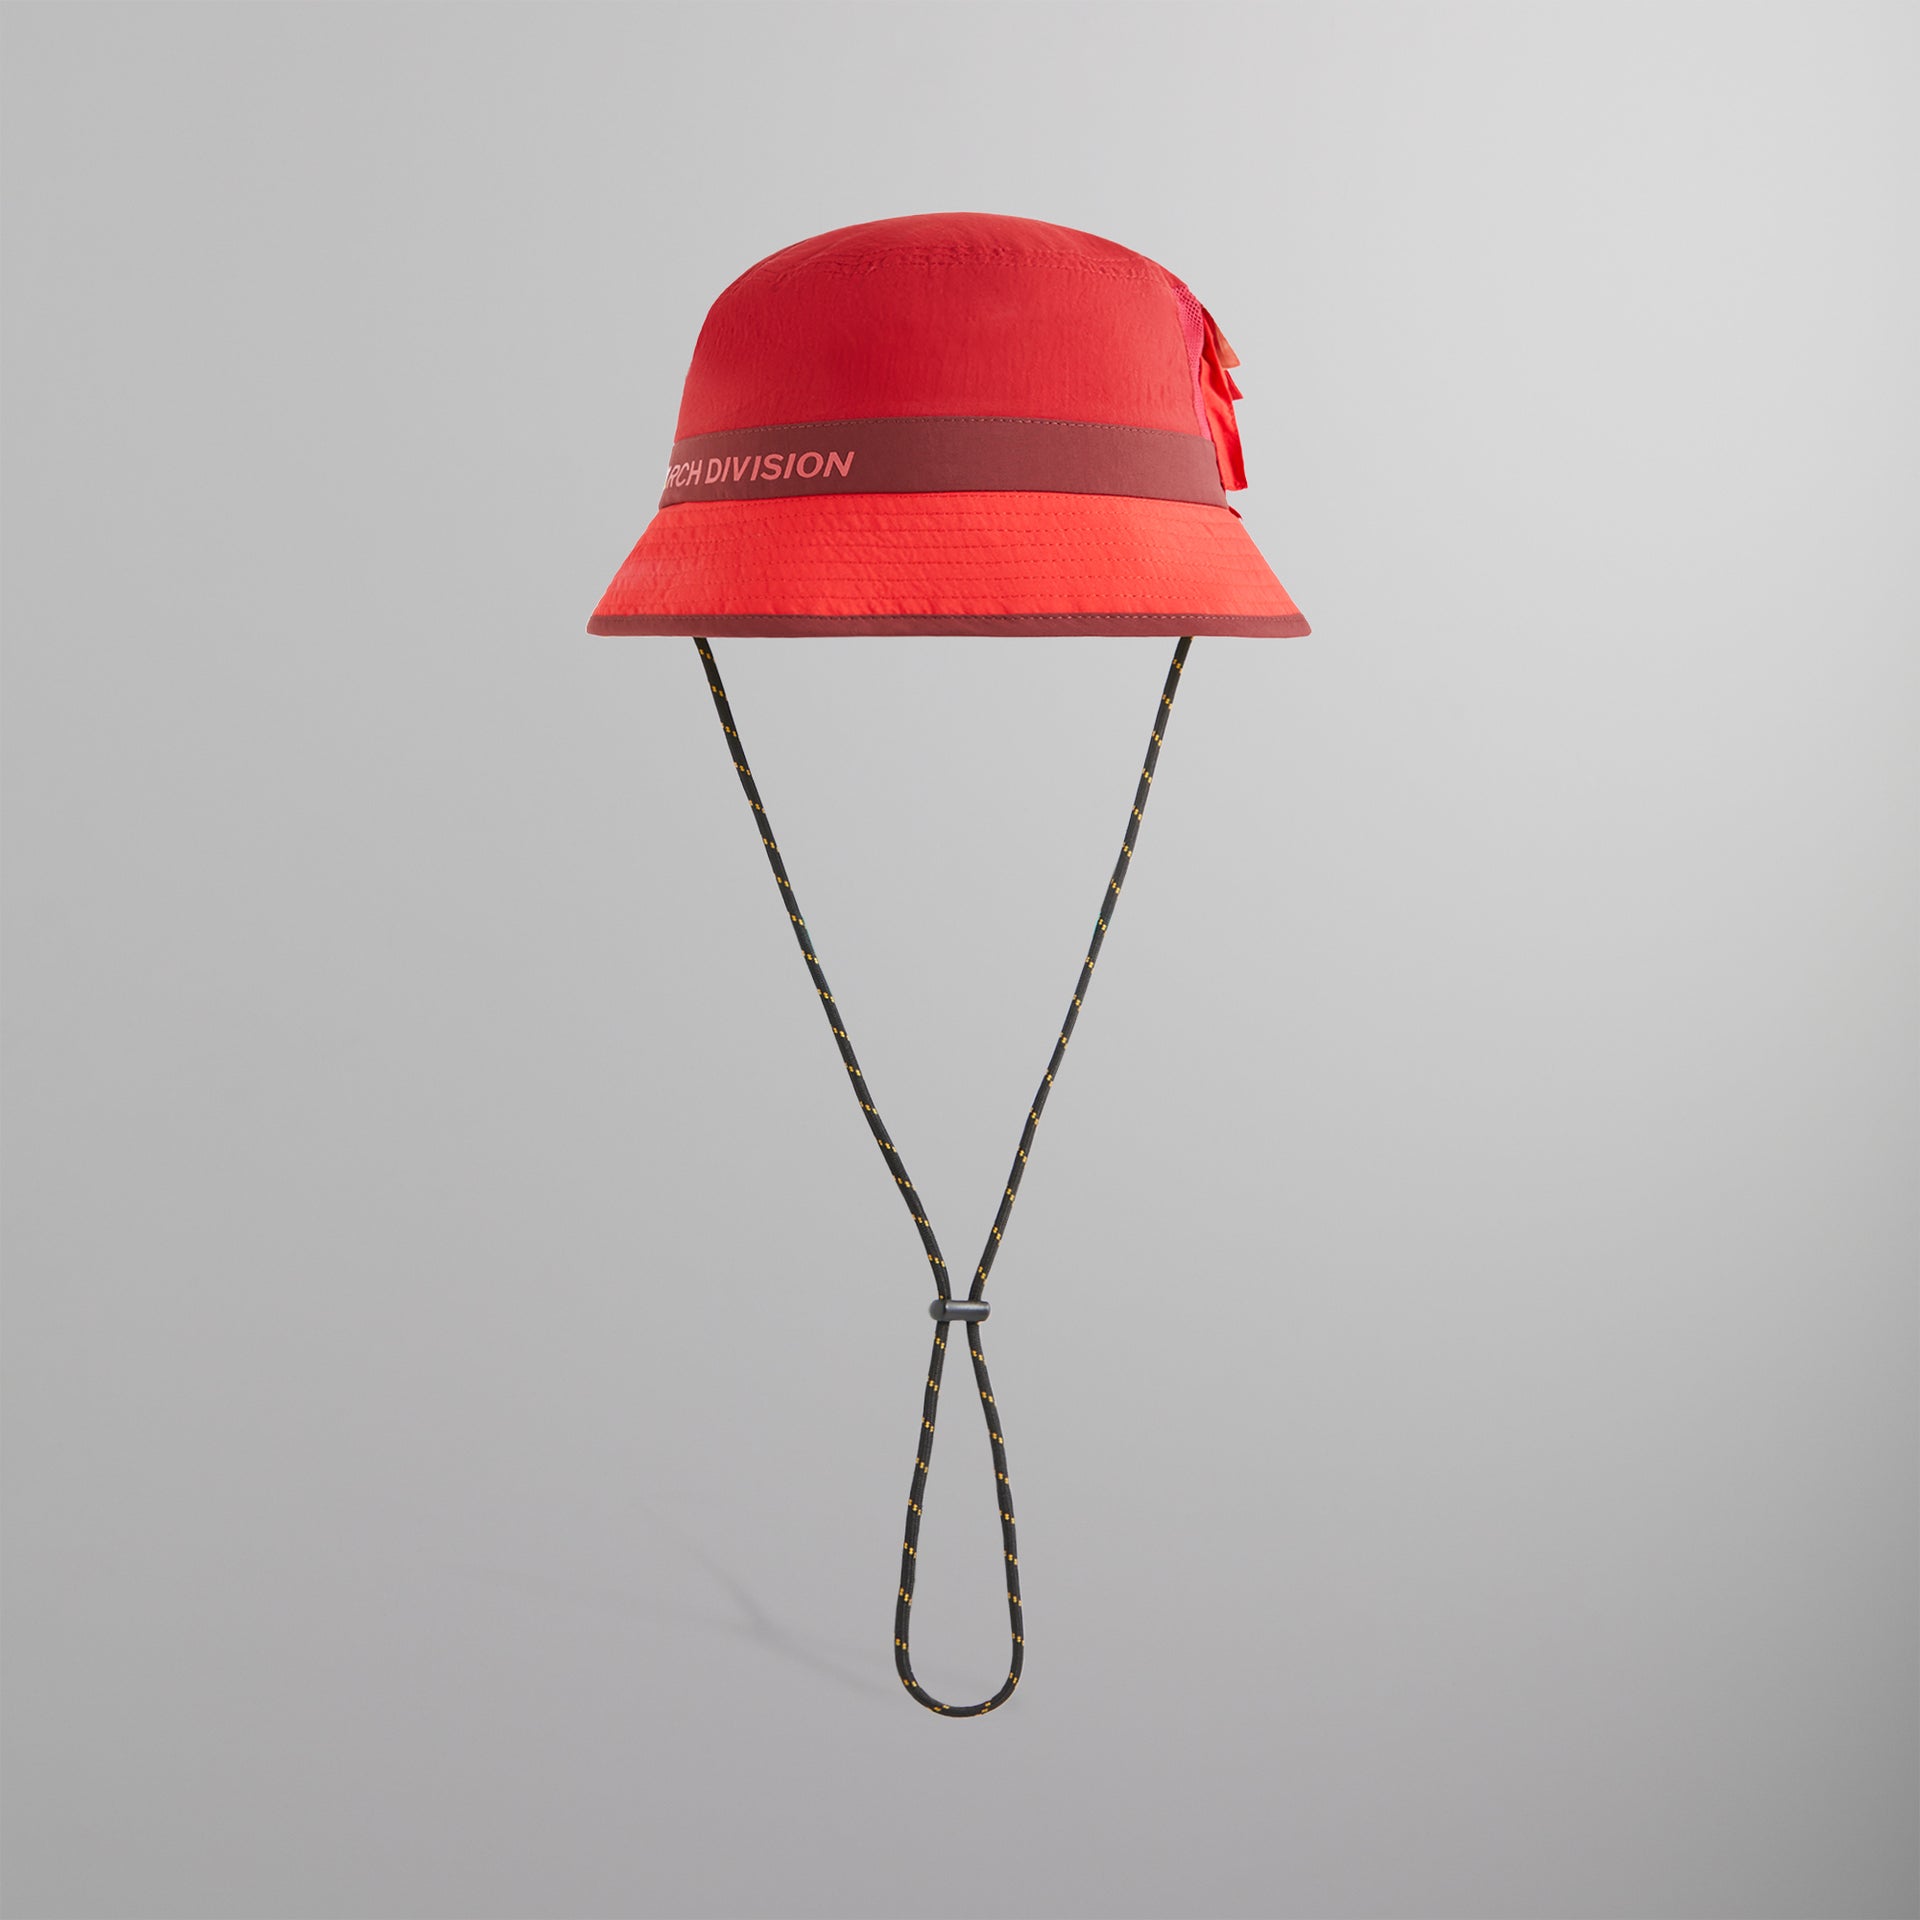 Erlebniswelt-fliegenfischenShops for Columbia Bagwell Nylon Utility Bucket Hat Are - Ping